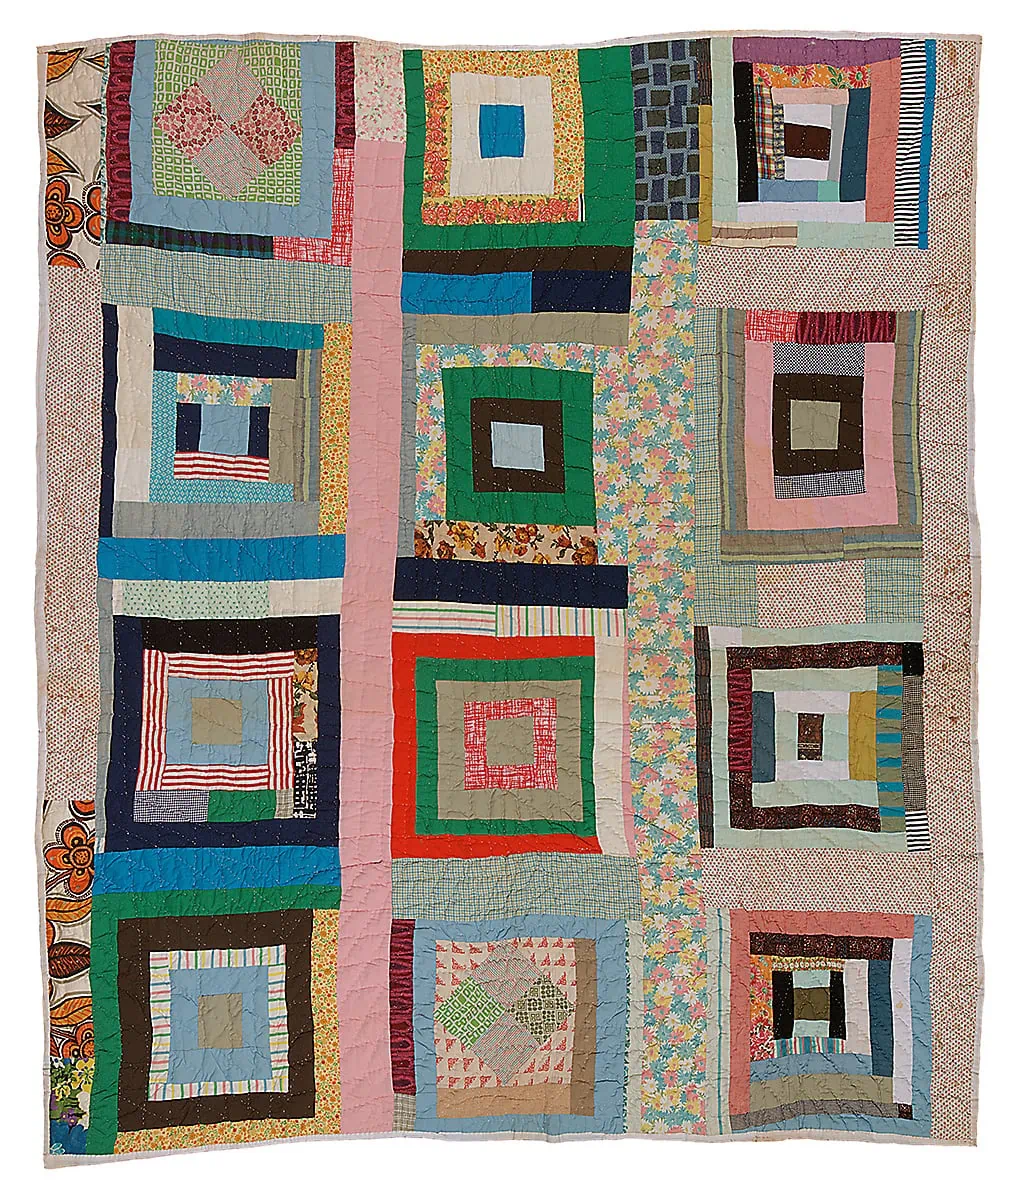 A multicolored quilt made of concentric squares and rectangles.